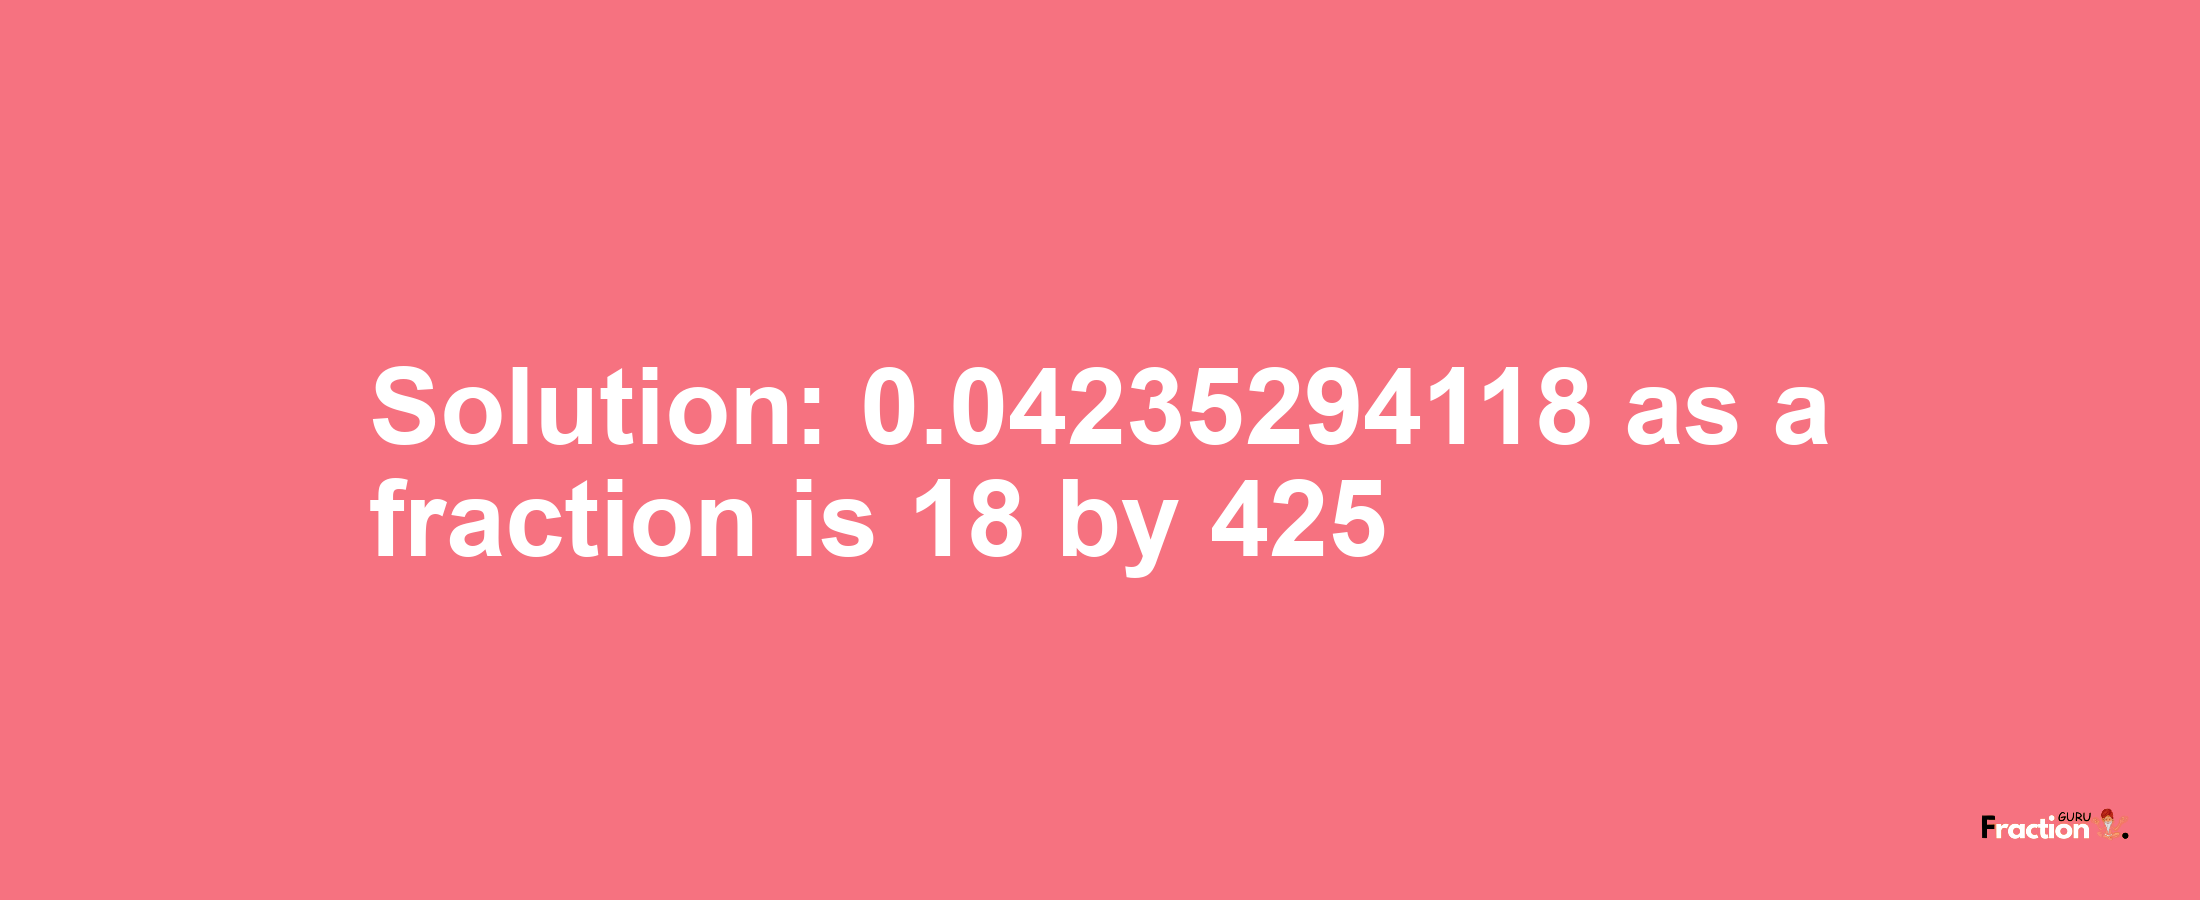 Solution:0.04235294118 as a fraction is 18/425